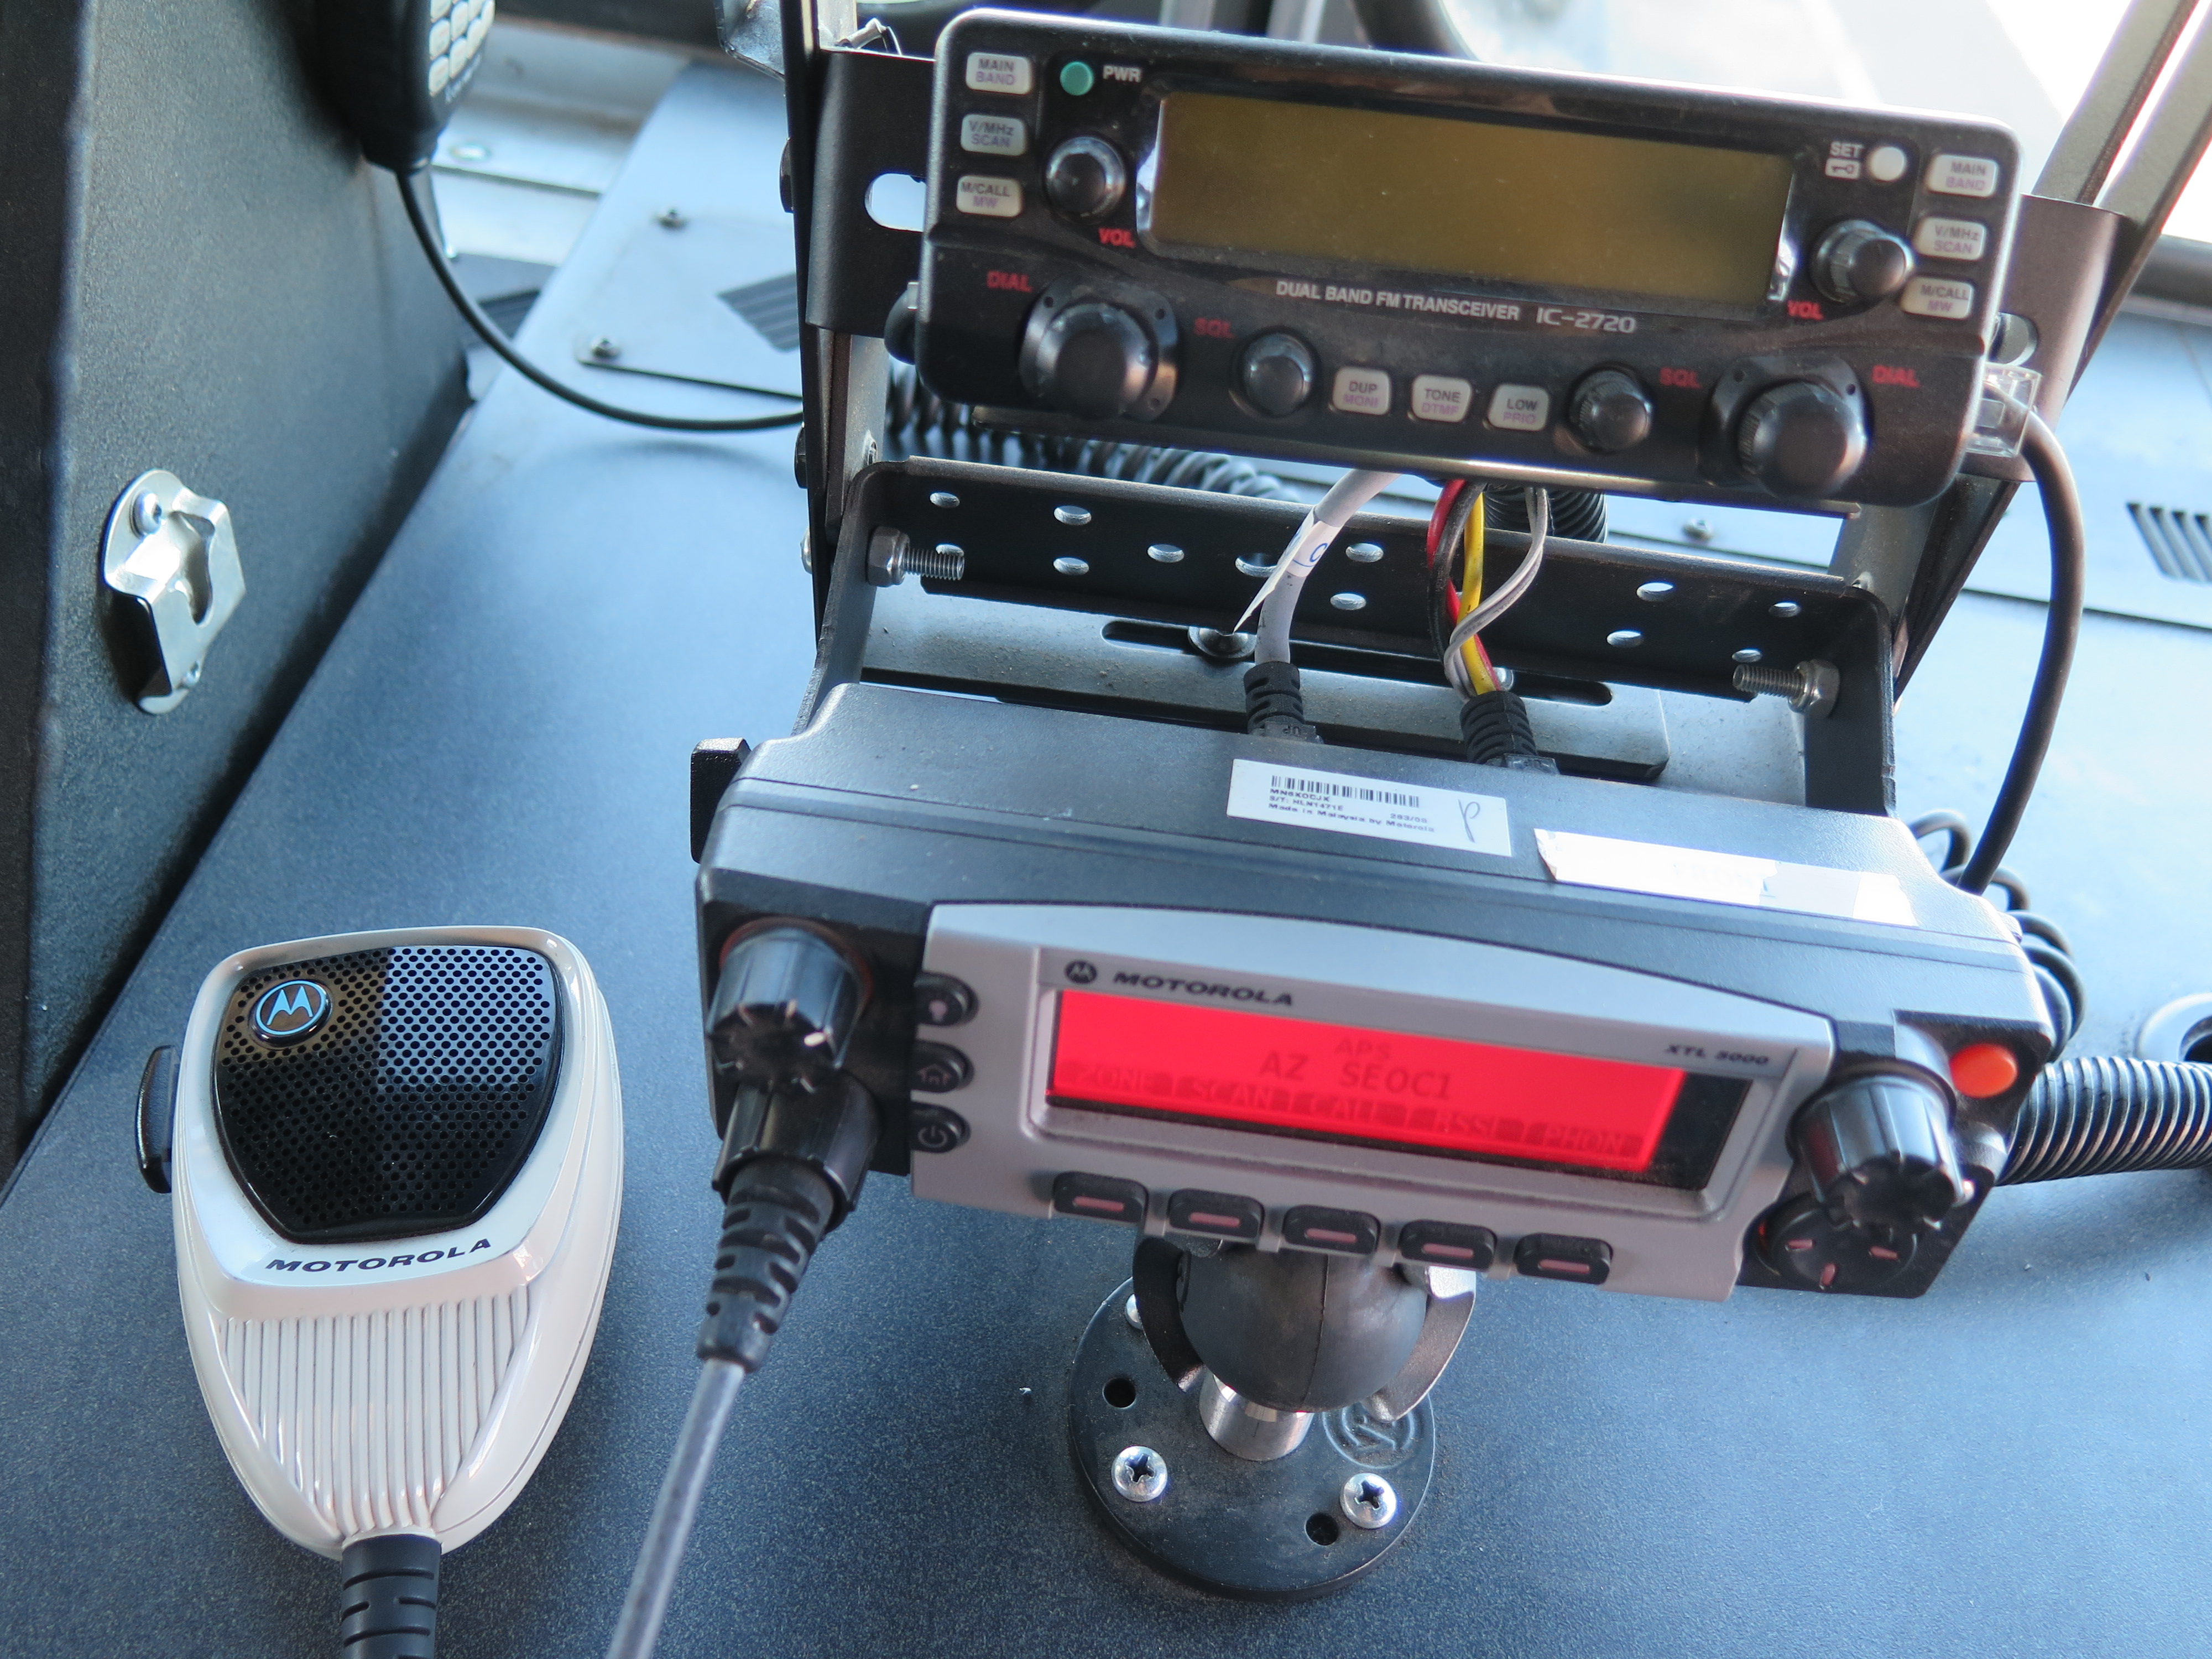 Photo of the amateur radion placed on the dashboard of the Mobile Emergency Operations and Communications Center